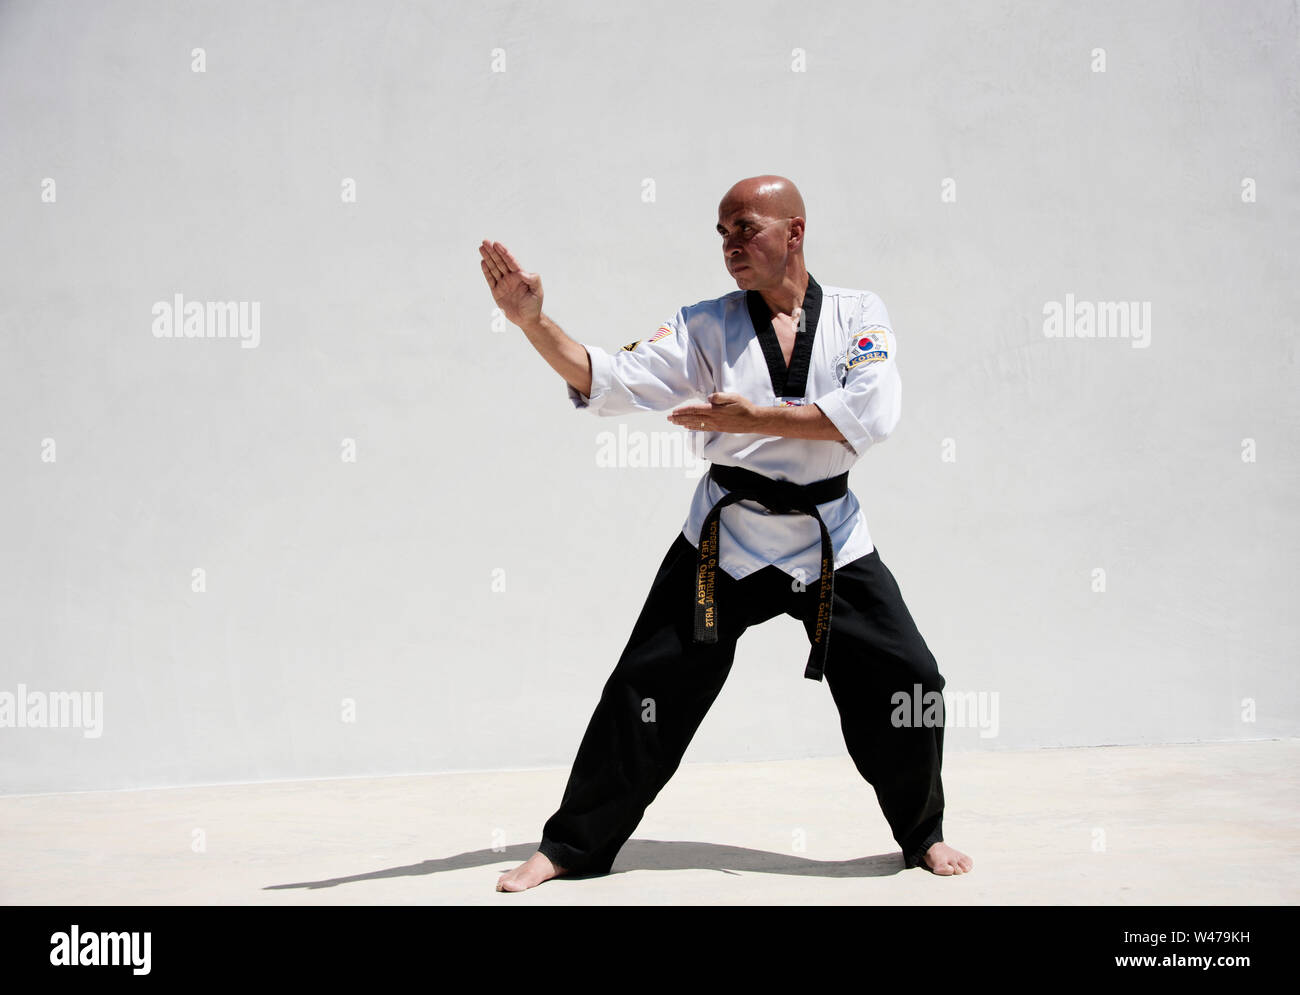 Black belt Sensei martial arts instructor demonstrating Taekwondo form. He is a master and instructor as designated by his uniform and form. Stock Photo